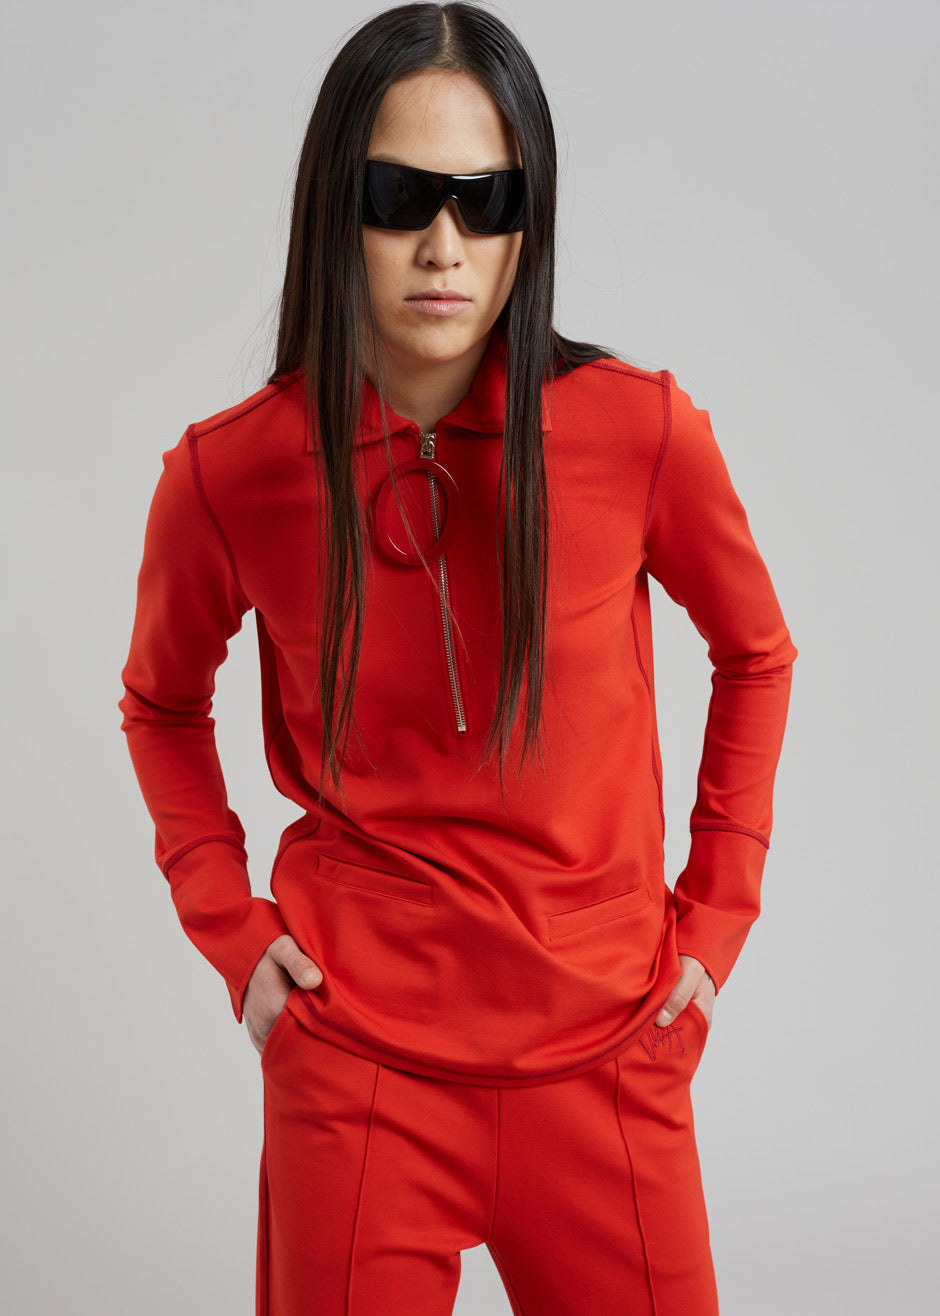 JW Anderson Ring Puller Half Zip Track Top - Red